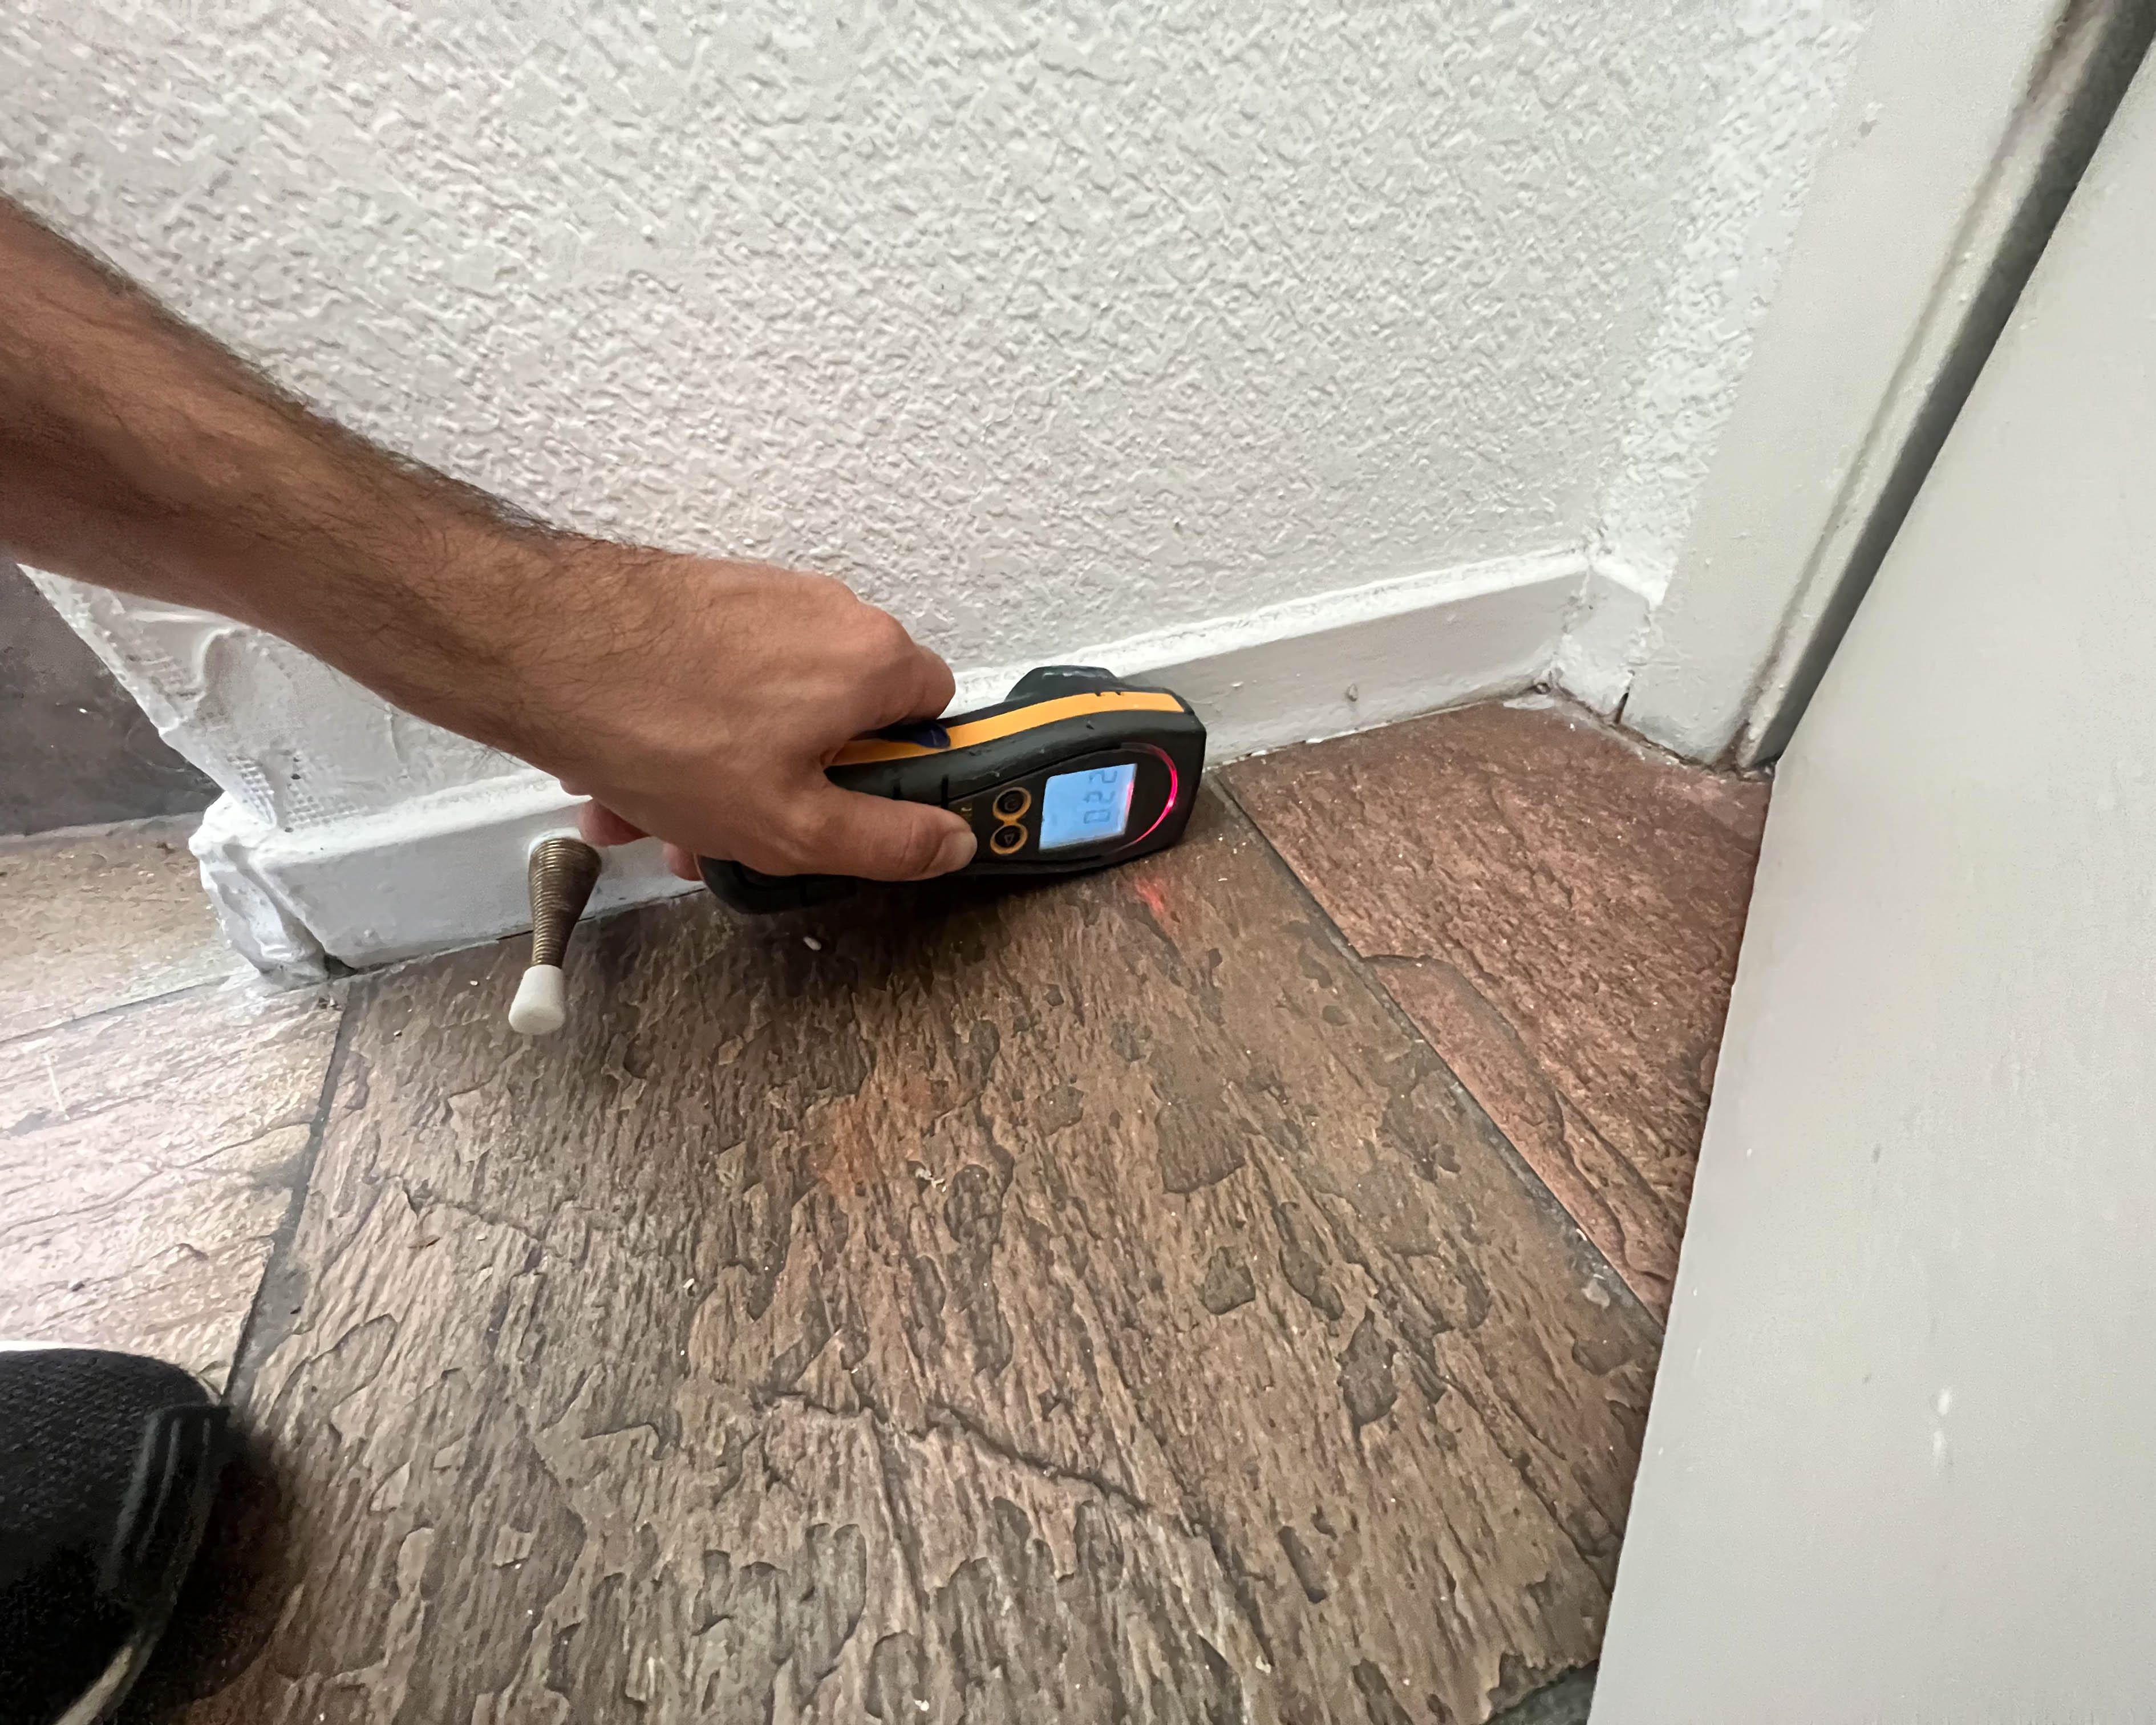 When water damage strikes, you need help fast. SERVPRO of  Laguna Beach/ Dana Point is available 24 hours a day, 7 days a week and 365 days a year to respond quickly to your water emergencies. Call us now!